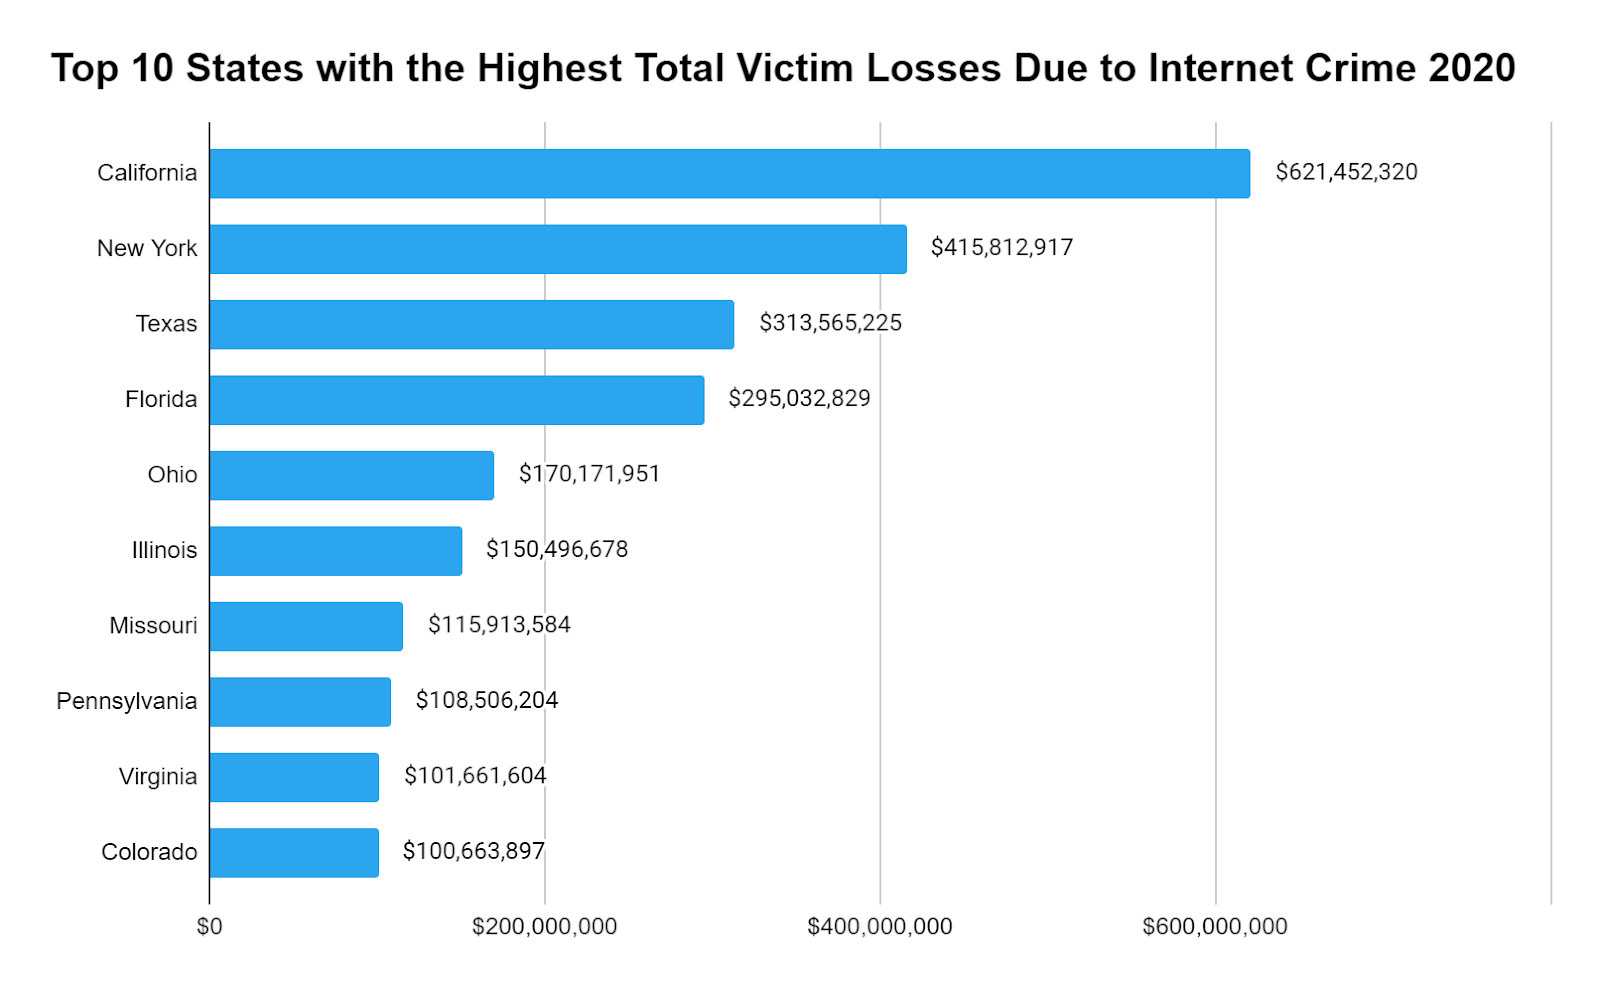 Top 10 states with highest total victim losses due to internet crime in 2020